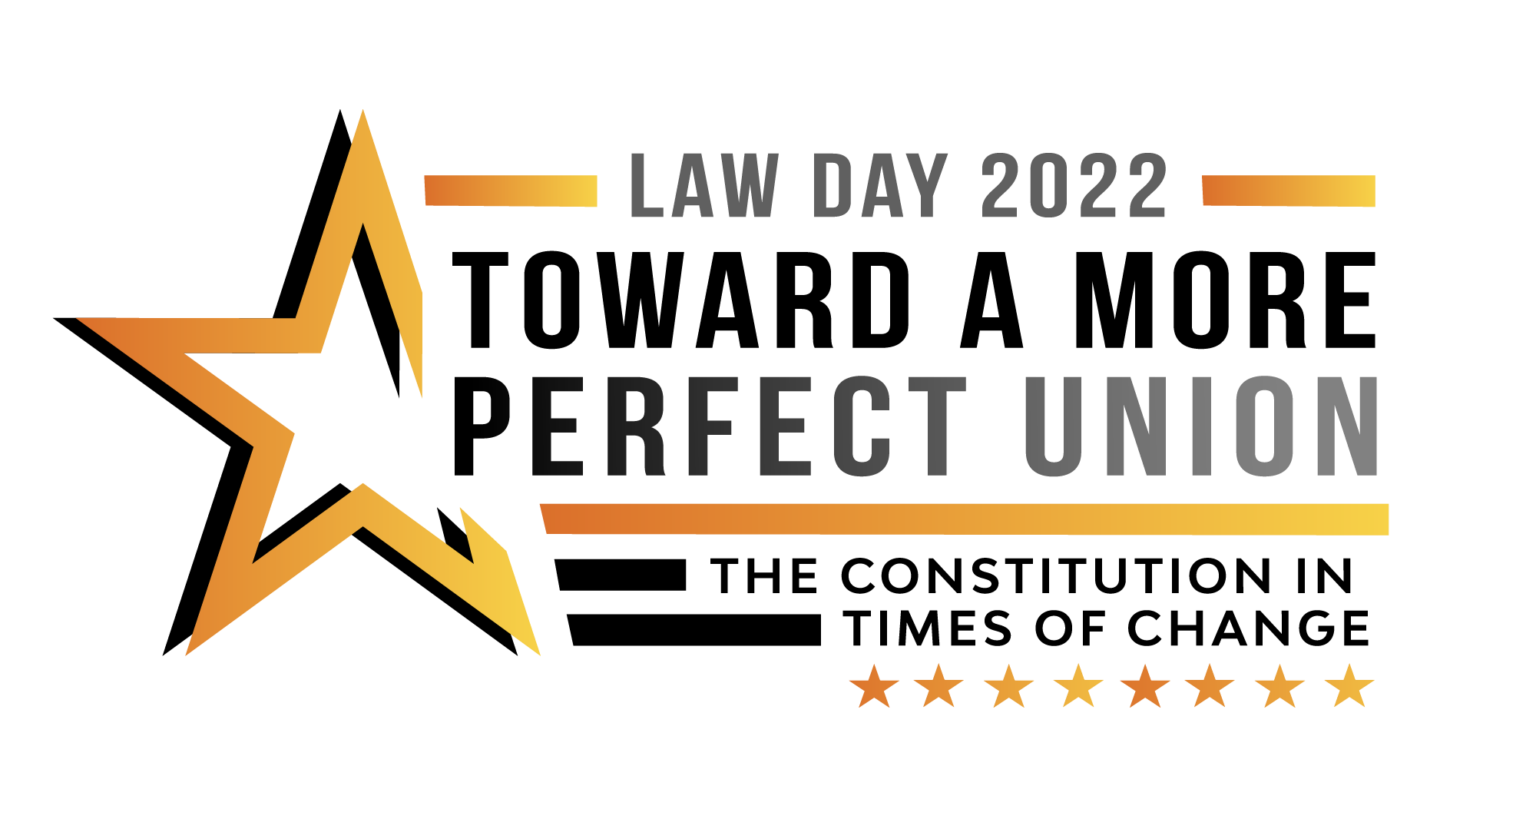 Law Day 2022: Toward a more perfect union